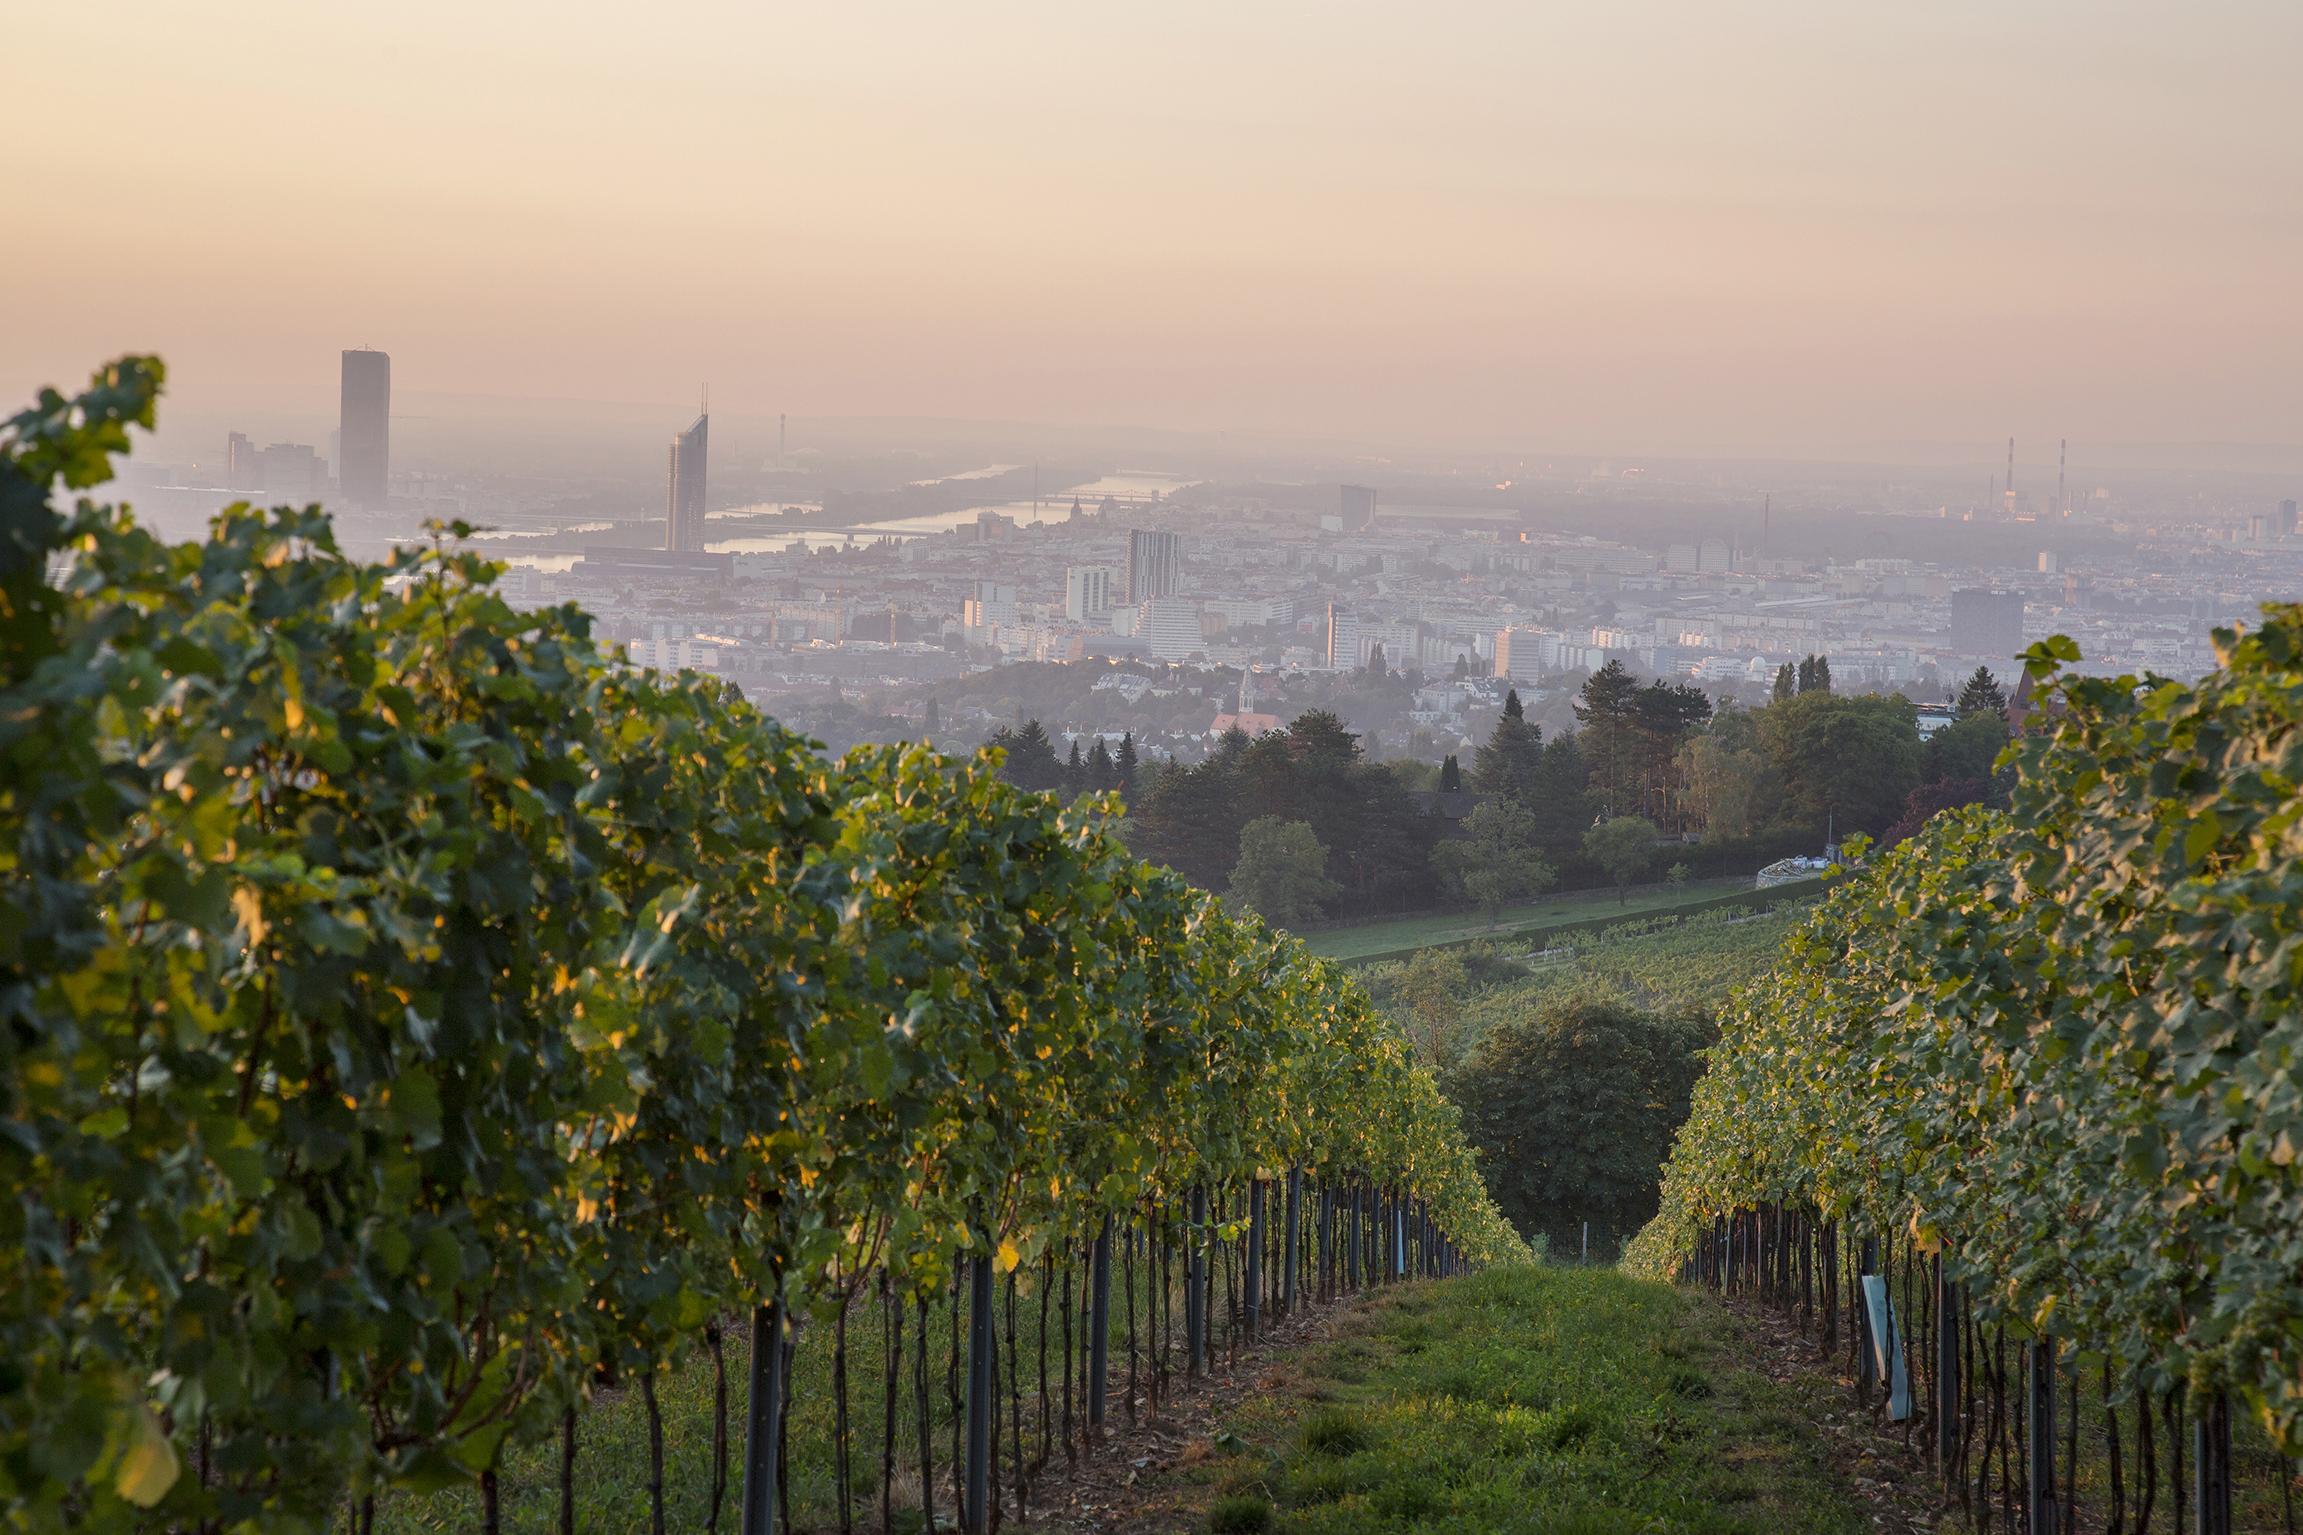 In summer, the wineries in the hills open bars among the vines (Weingut Cobenzl )